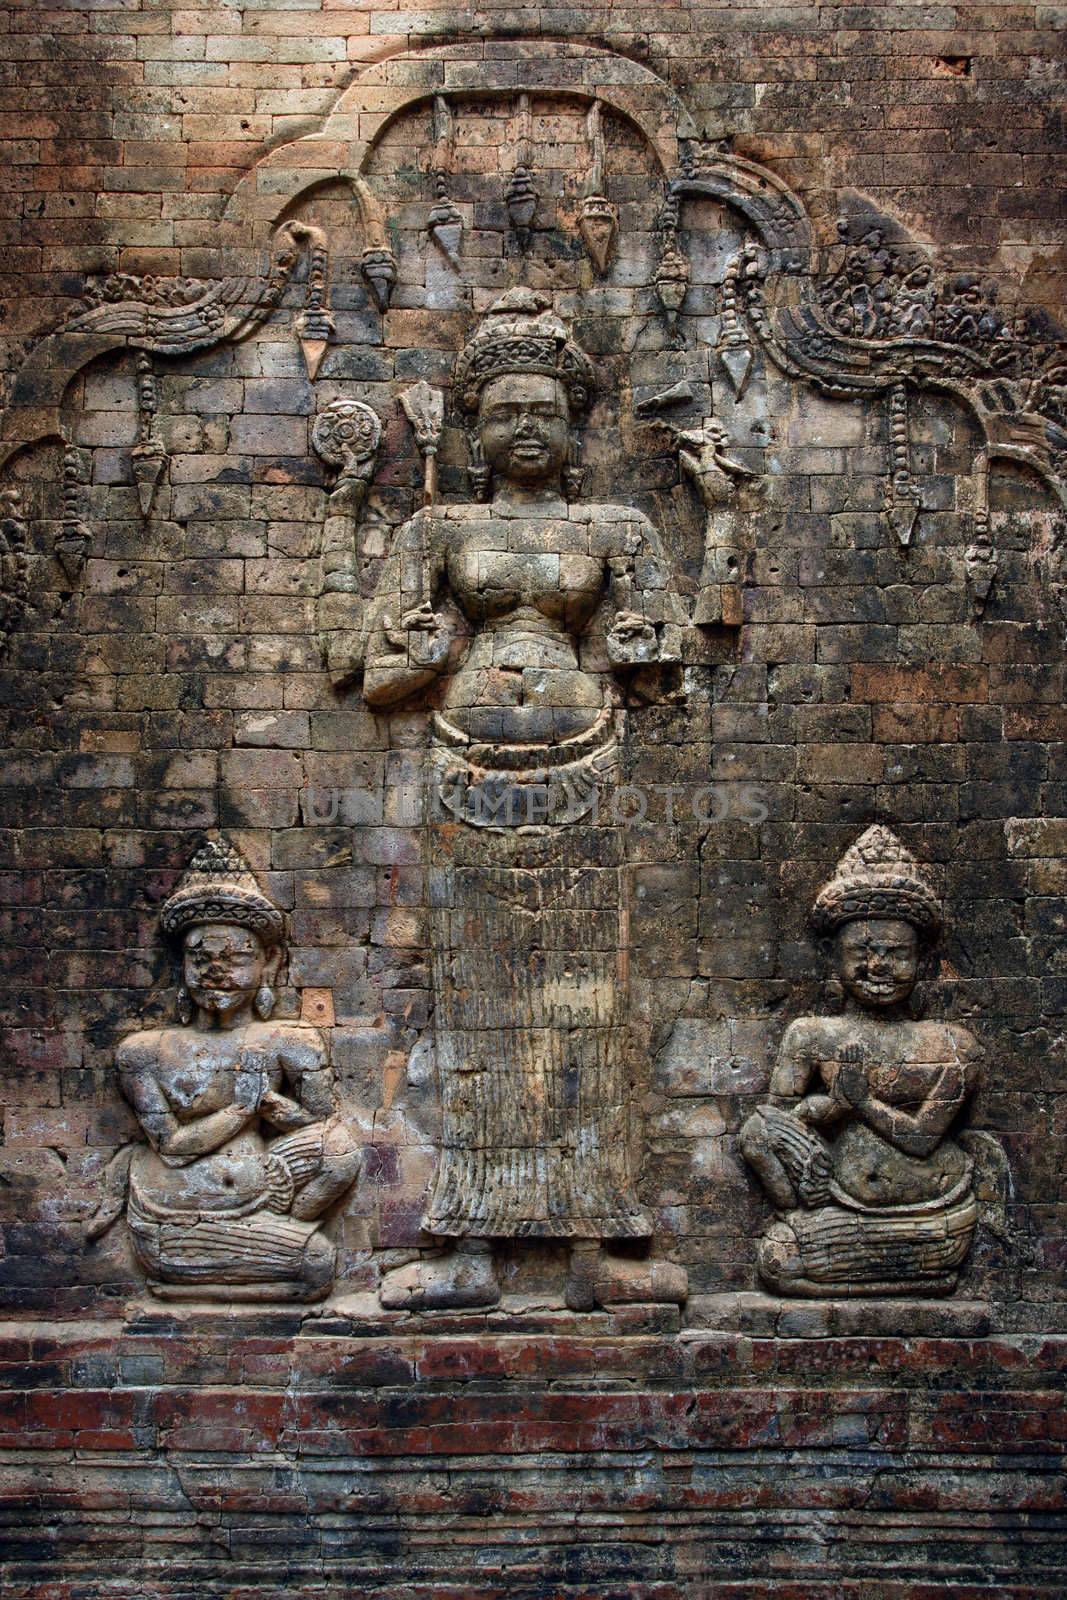 A carved brick wall in the Angkor temples in Siem Reap, Cambodia
